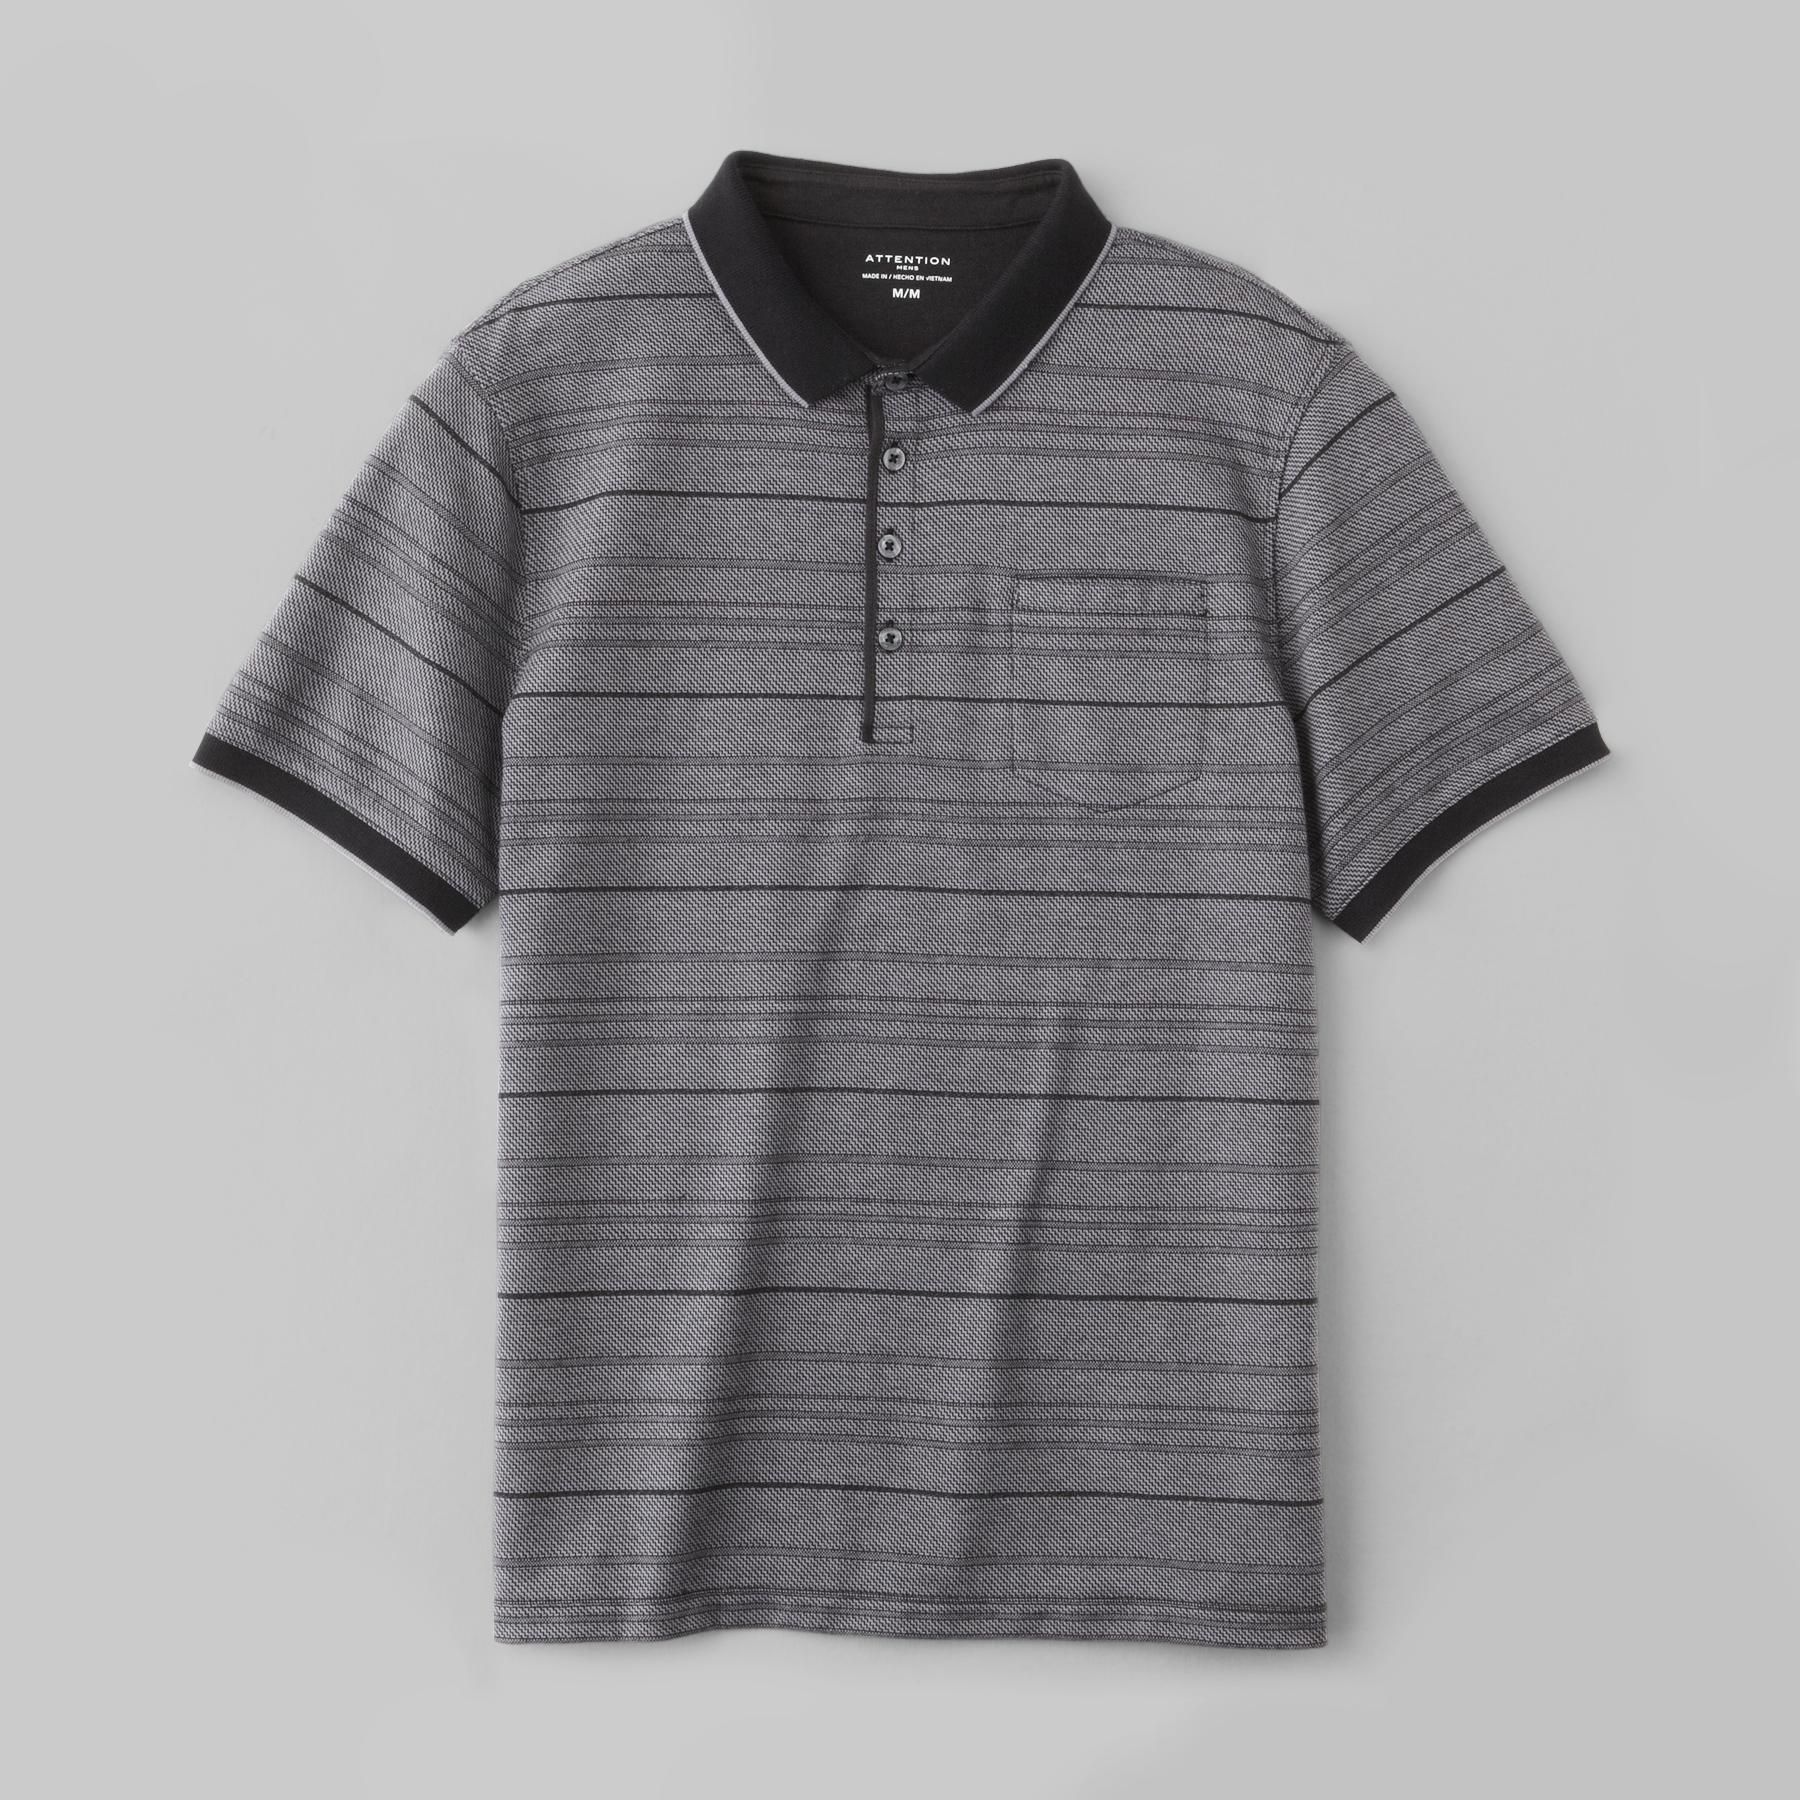 Attention Men's Striped Polo Shirt